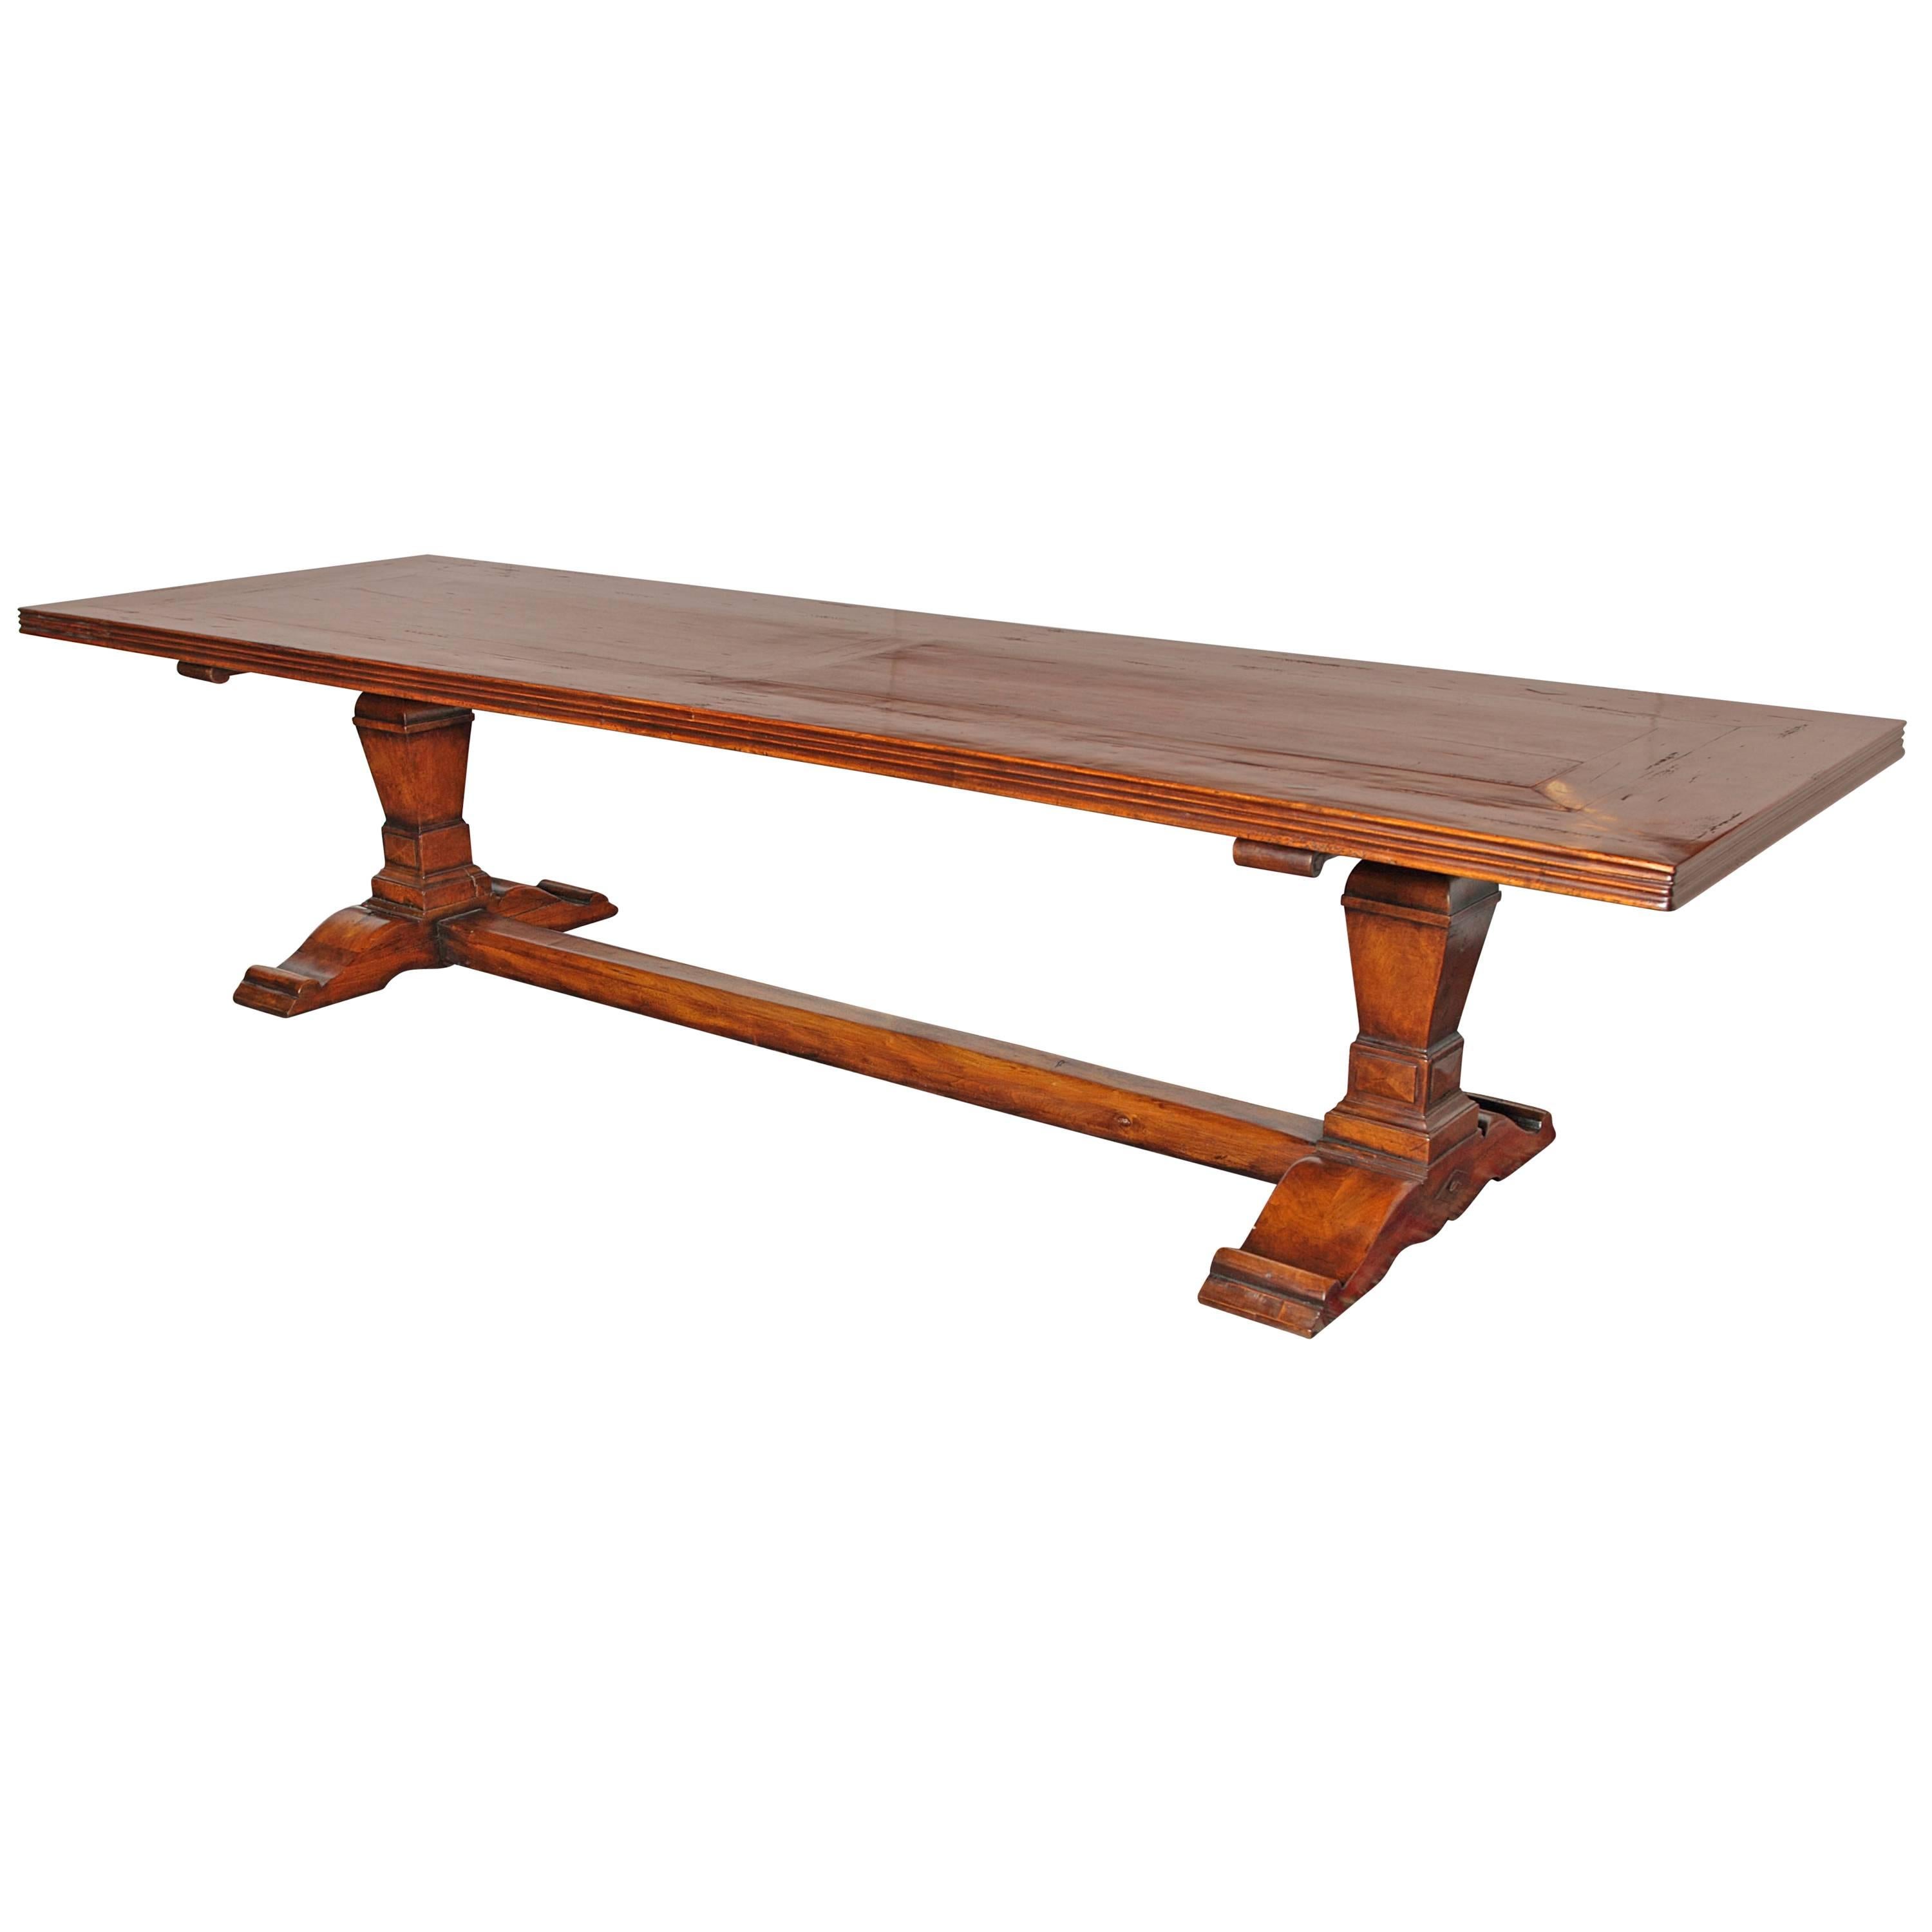 Large Antique 19th Century Walnut Trestle Table from Southern France